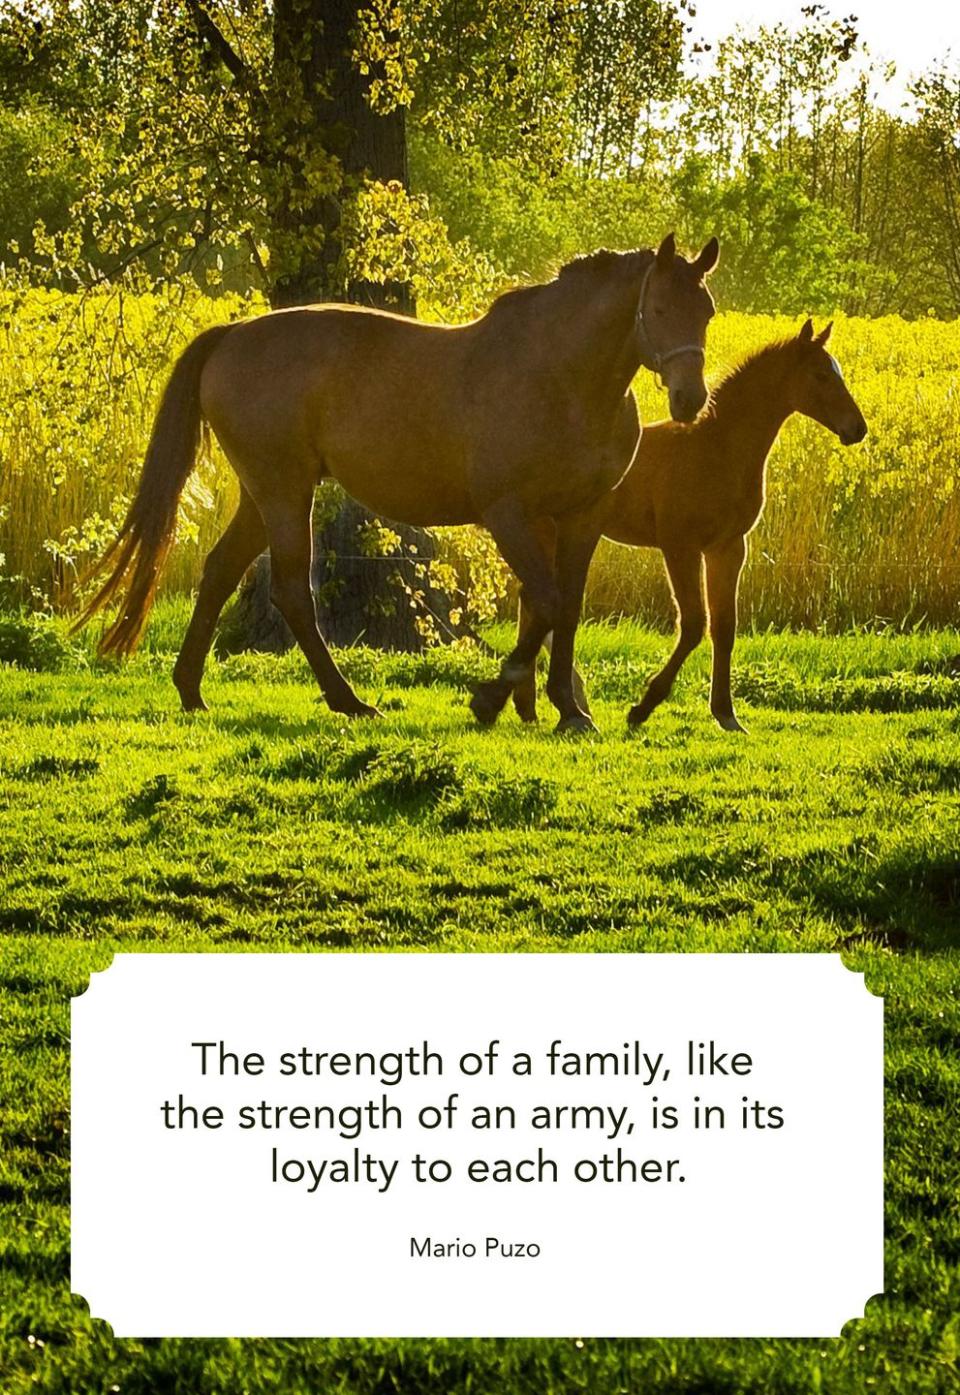 <p>“The strength of a family, like the strength of an army, is in its loyalty to each other.”</p>